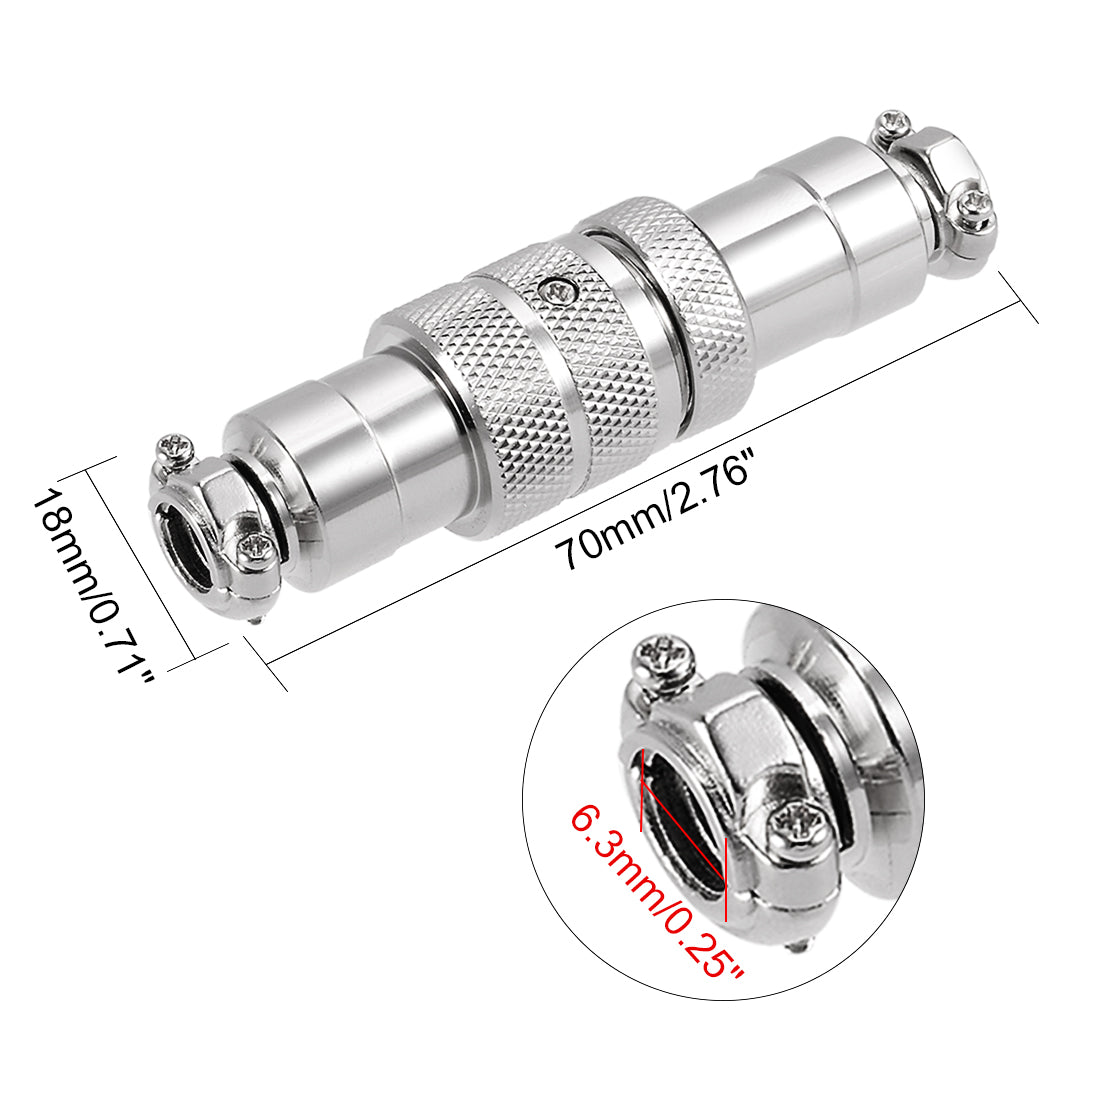 uxcell Uxcell Aviation Connector, 16mm 4Terminals 5A 125V GX16-4 Waterproof Male Wire Panel Power Chassis Metal Fittings Connector Aviation Silver Tone